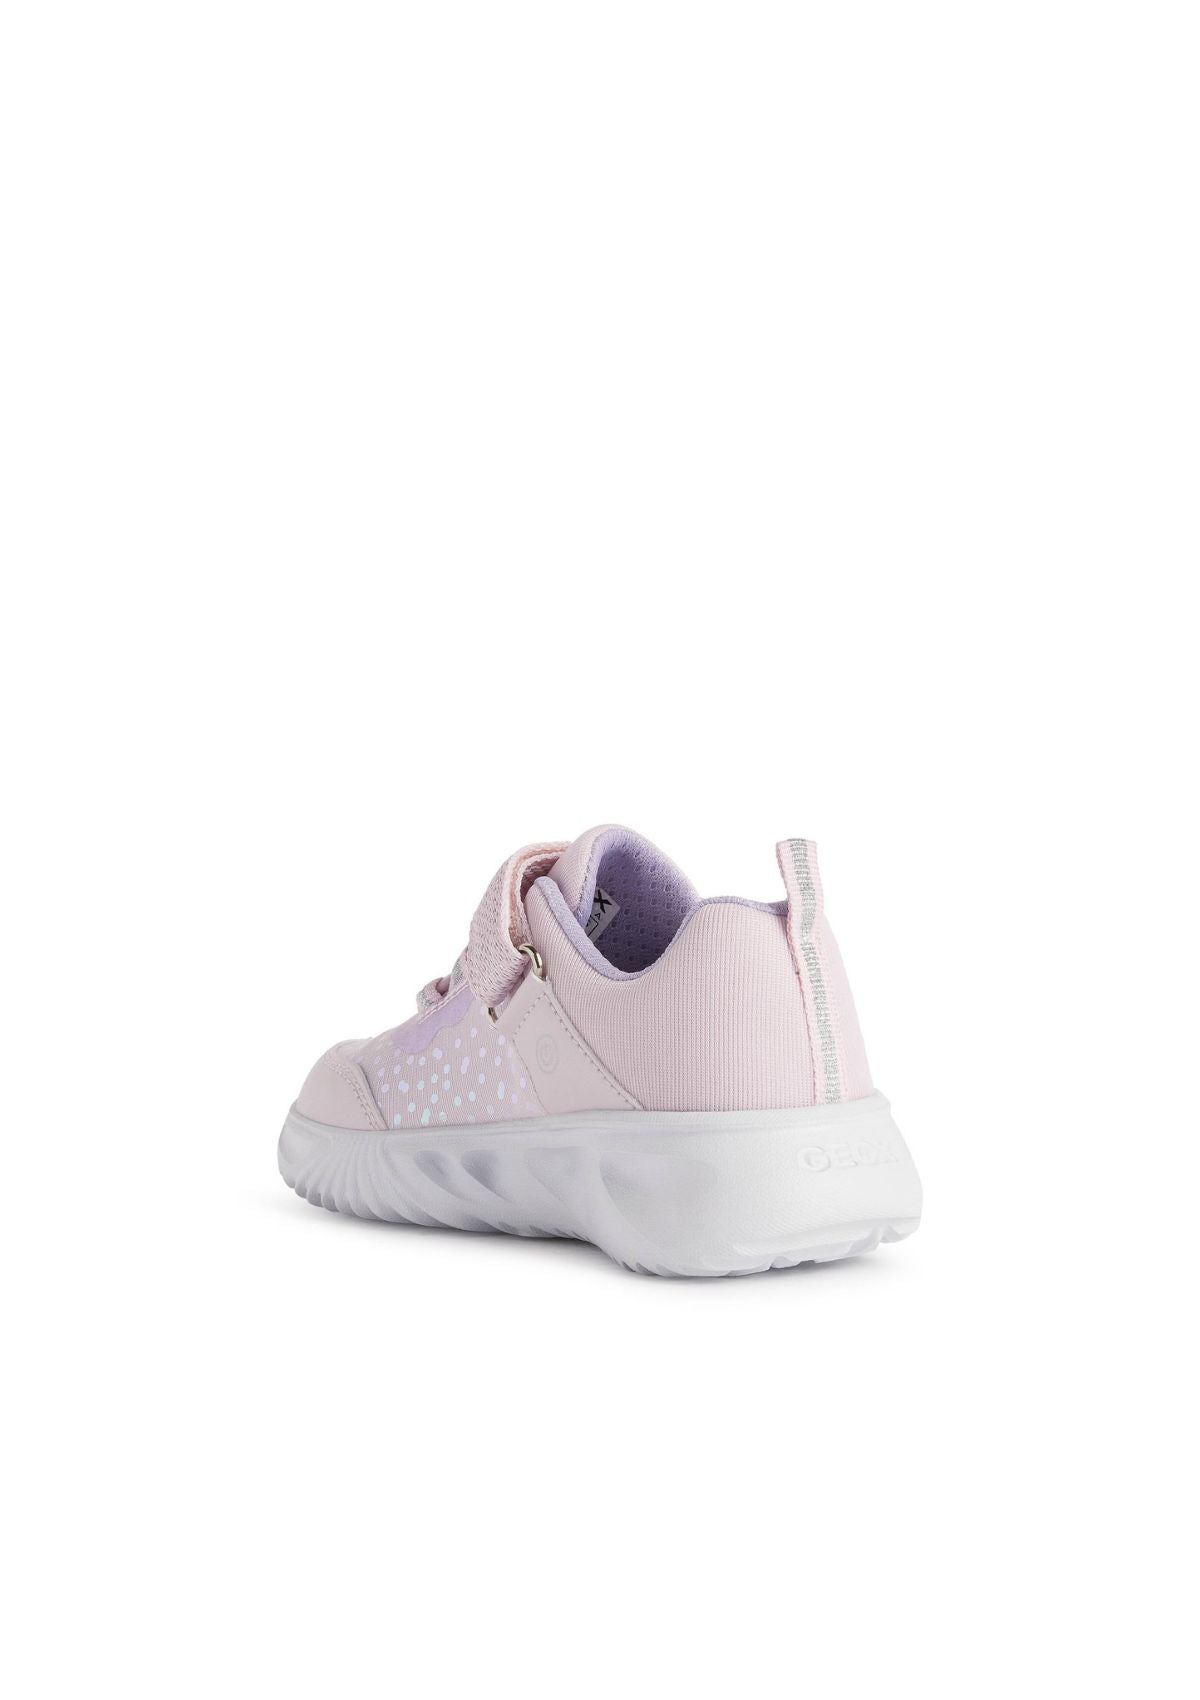 Geox Junior Girls ASSISTER Pink Lilac back